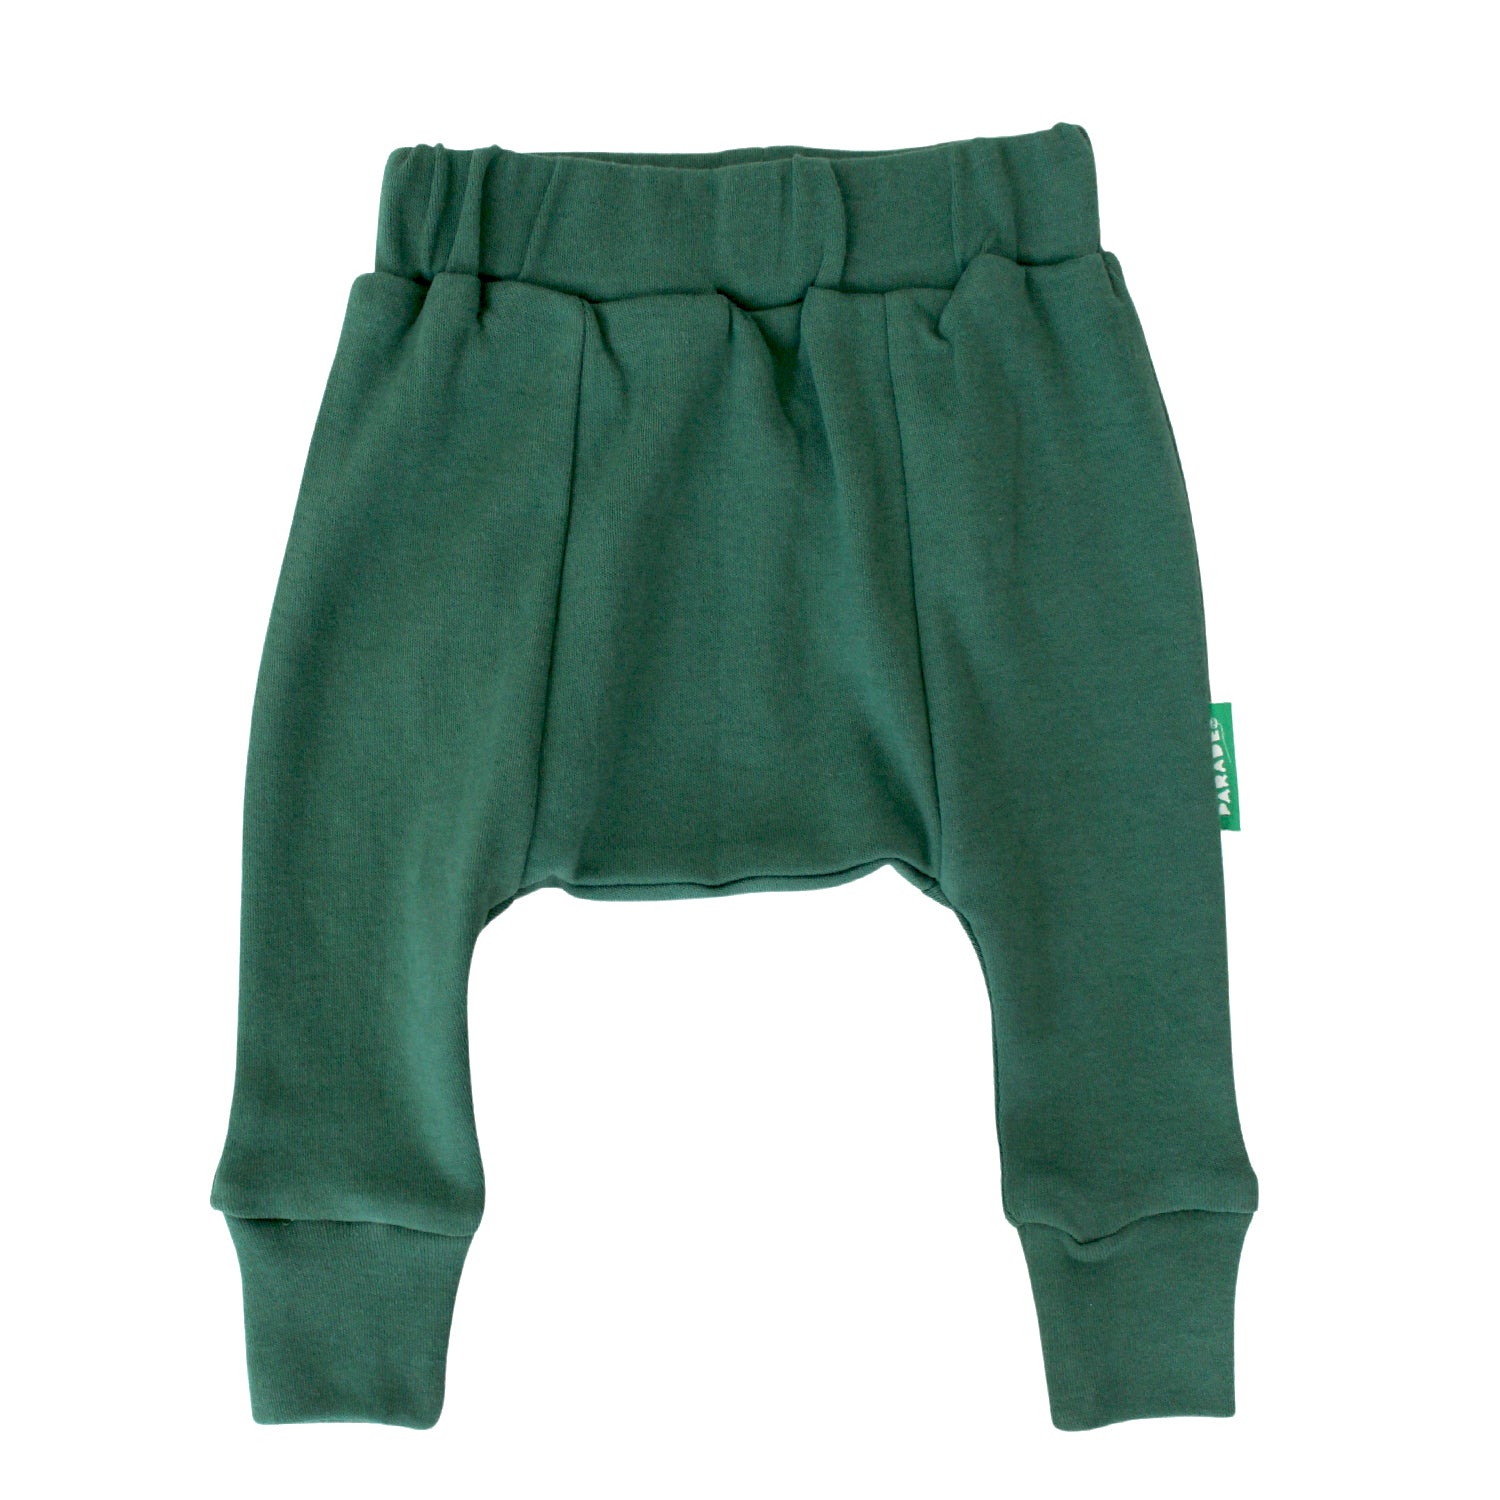 Solid Color Women's Tall Harem Pants in Dark Green